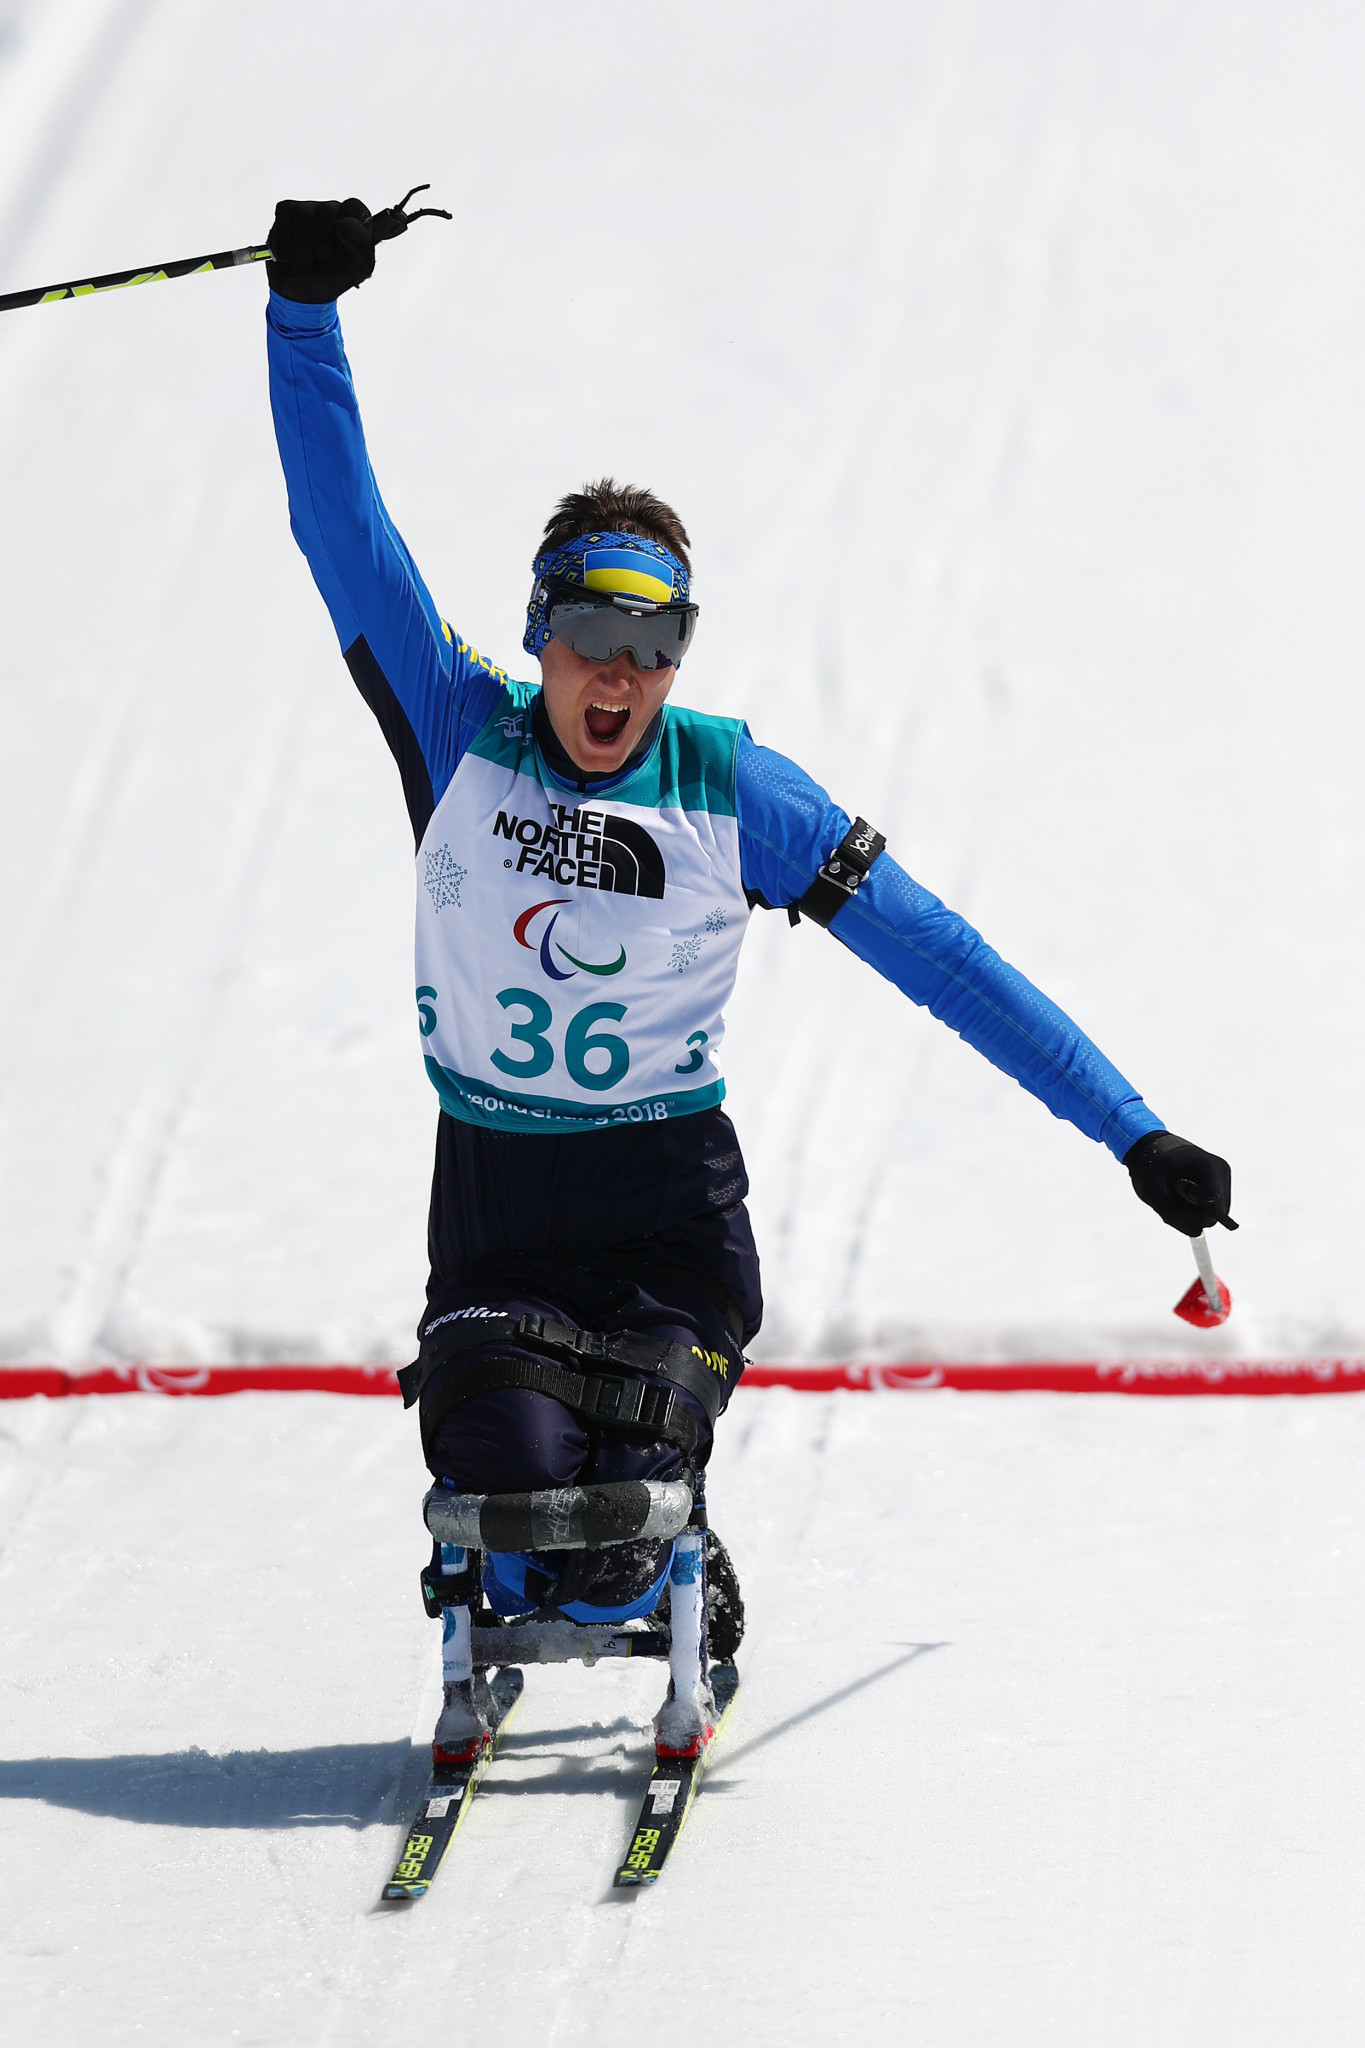 Rad is best of Paralympian rivals on day two at World Para Nordic Skiing World Cup Finals in Sapporo